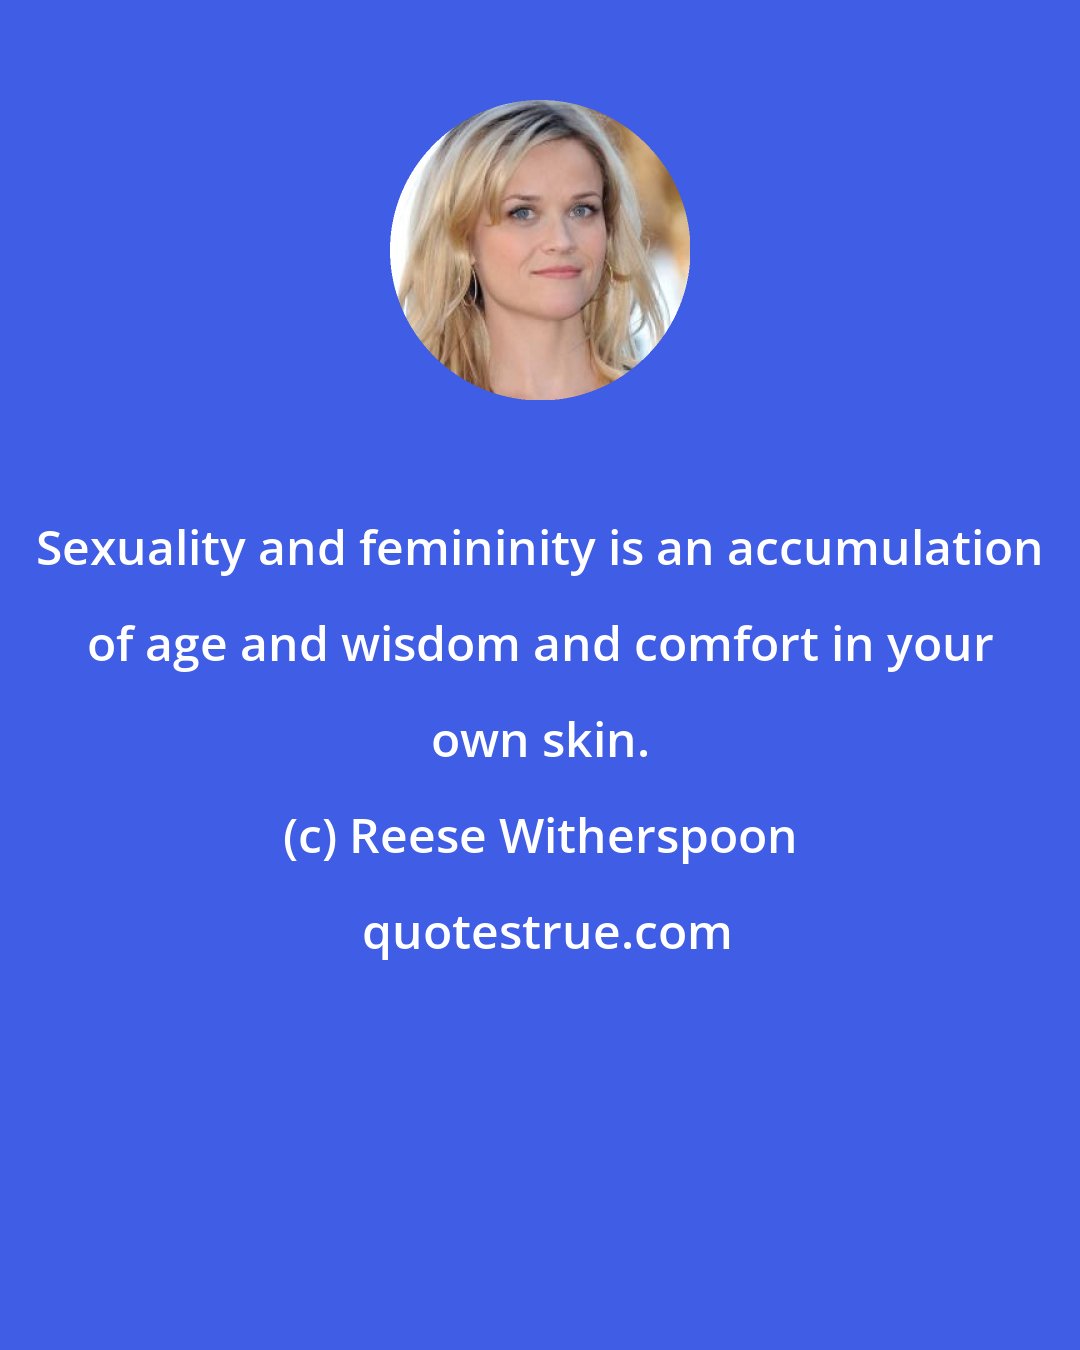 Reese Witherspoon: Sexuality and femininity is an accumulation of age and wisdom and comfort in your own skin.